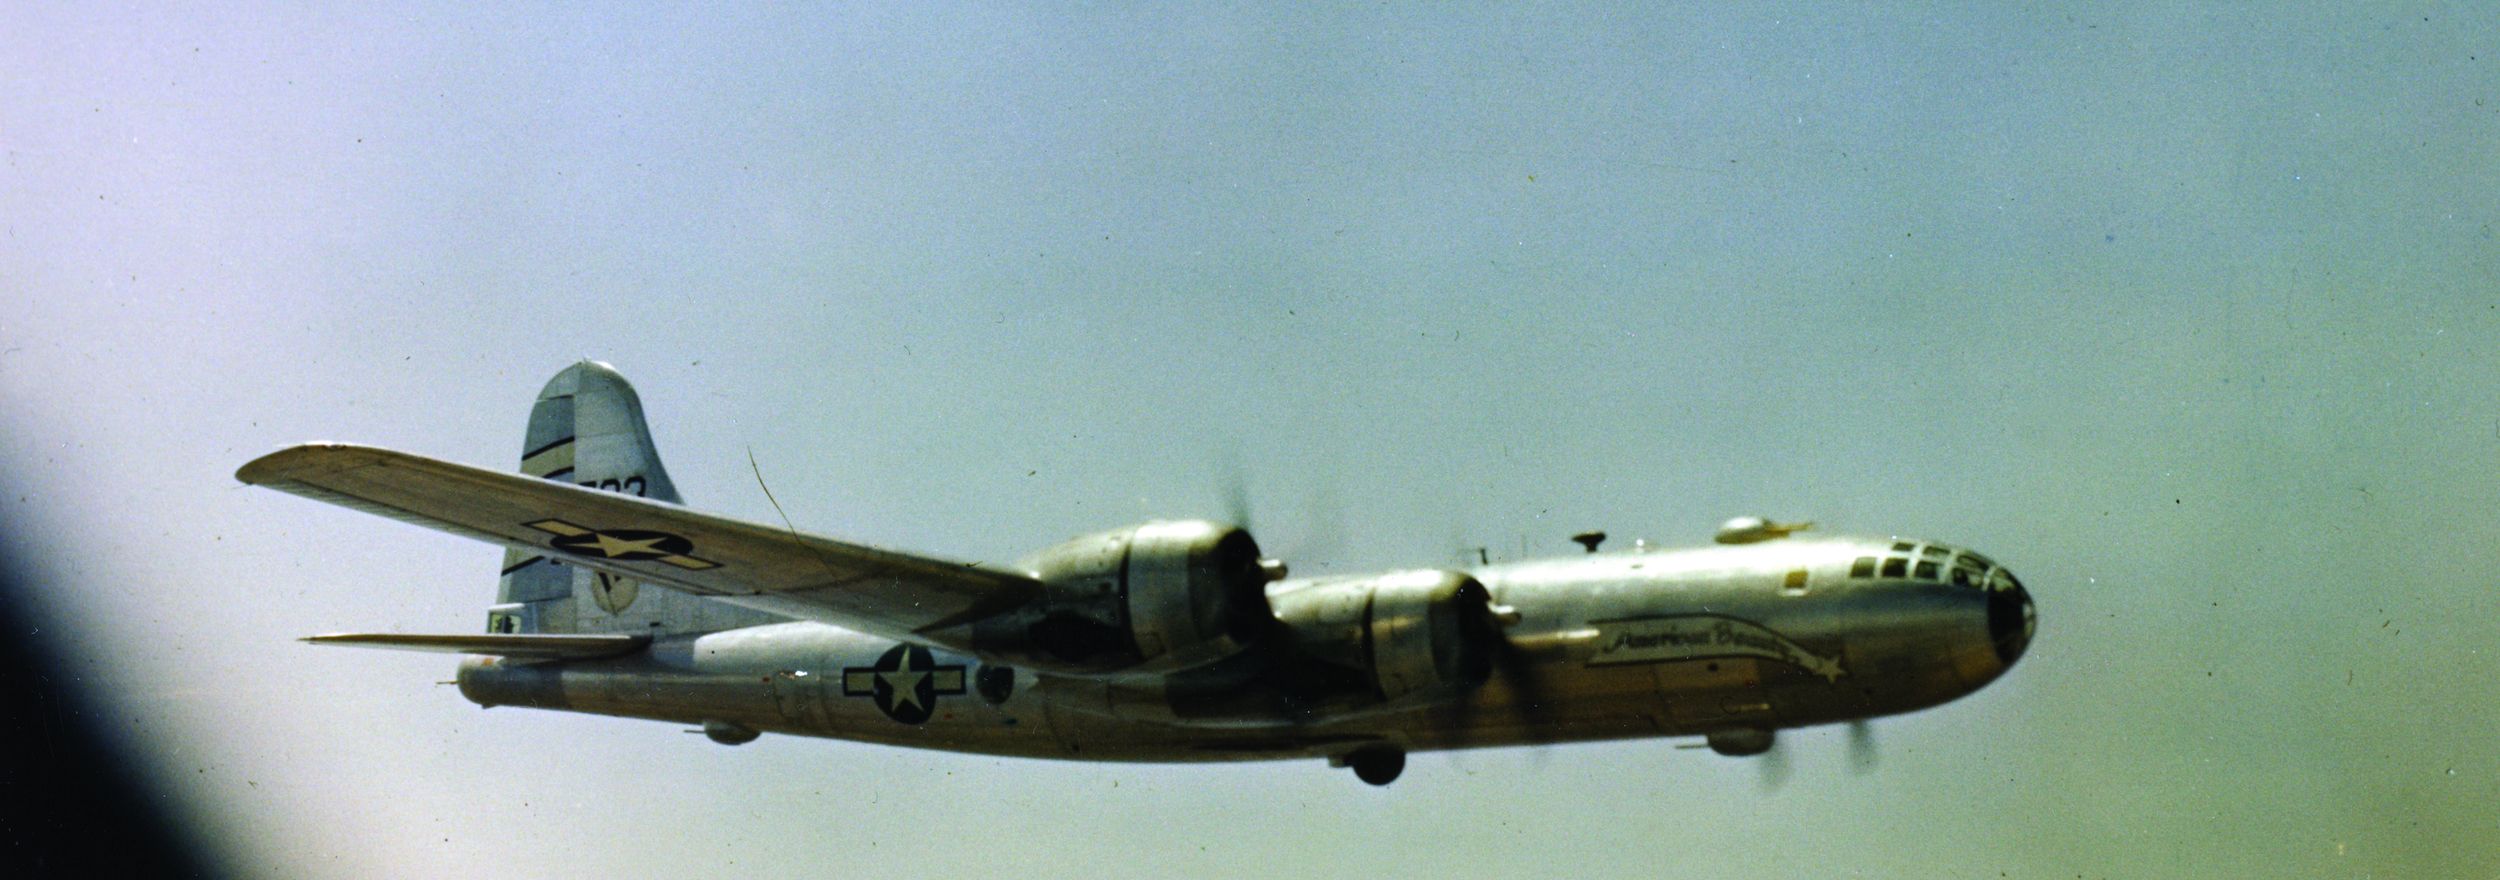 In June 1945, the Boeing B-29 Superfortress bomber named “American Beauty” is pictured winging its way toward a target in Japan. Fighters and antiaircraft guns made missions to the Home Islands extremely hazardous for American crews.